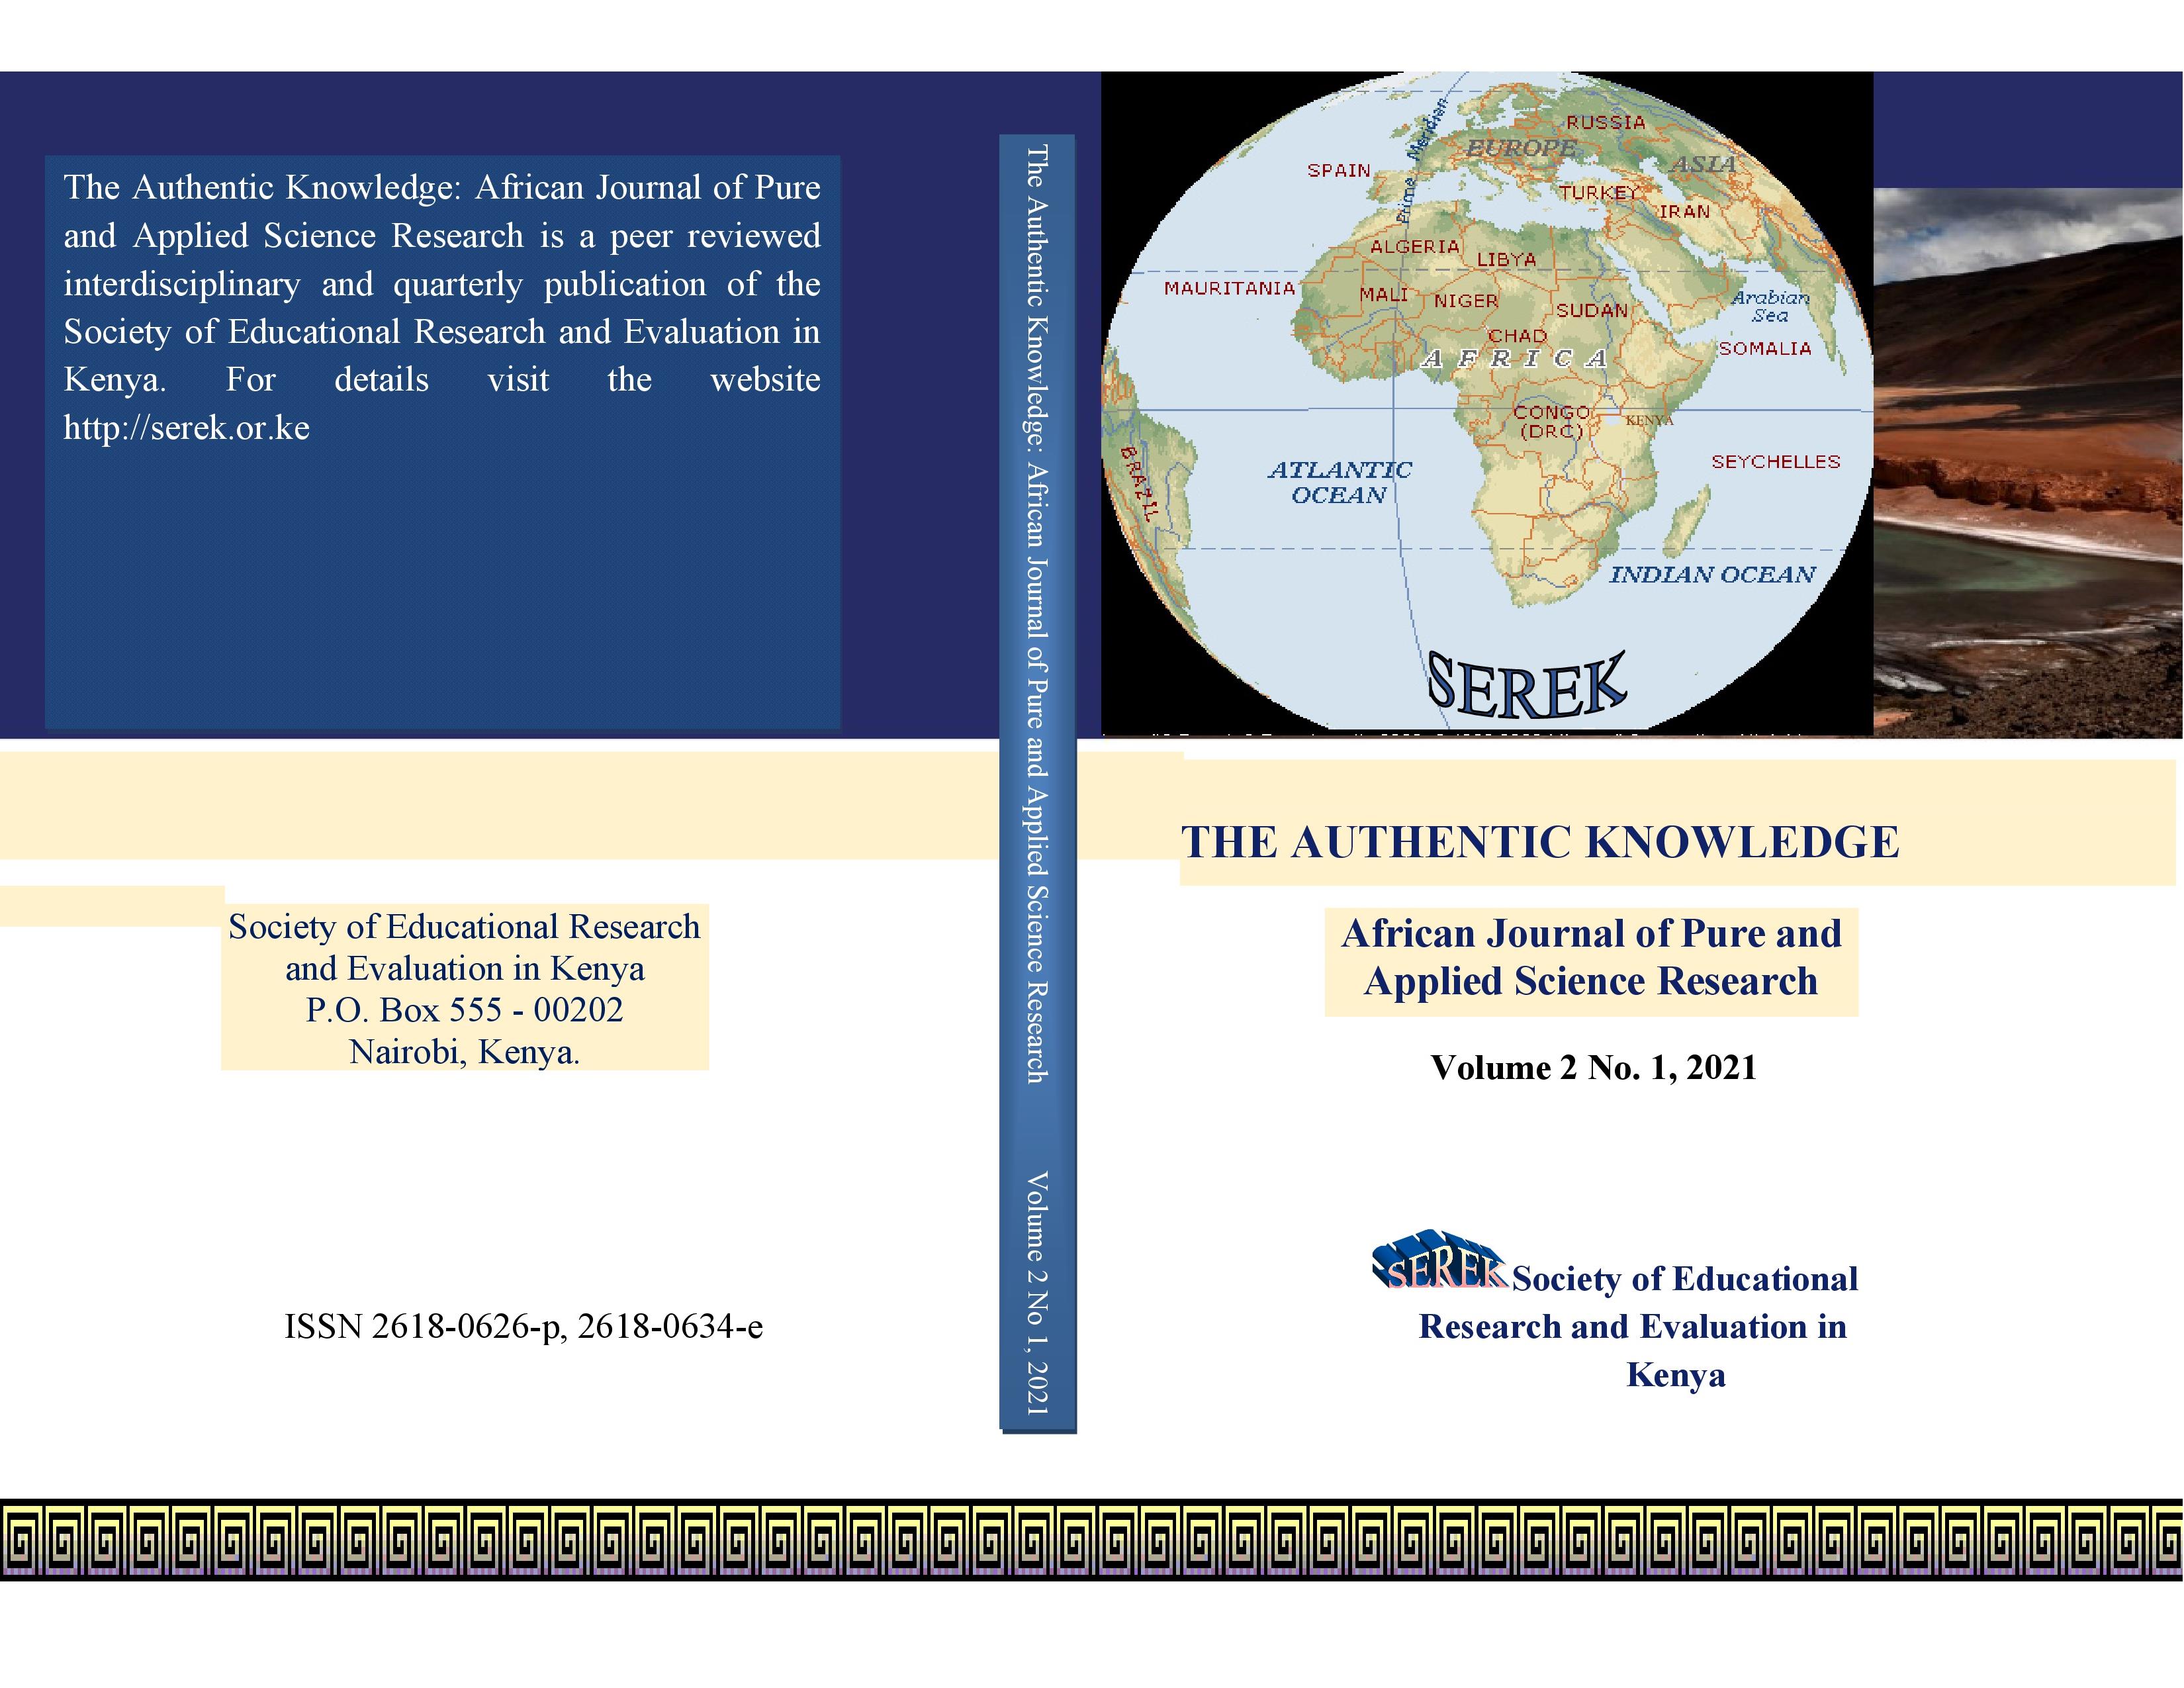 The Authentic Knowledge: African Journal of Pure and Applied Science Research